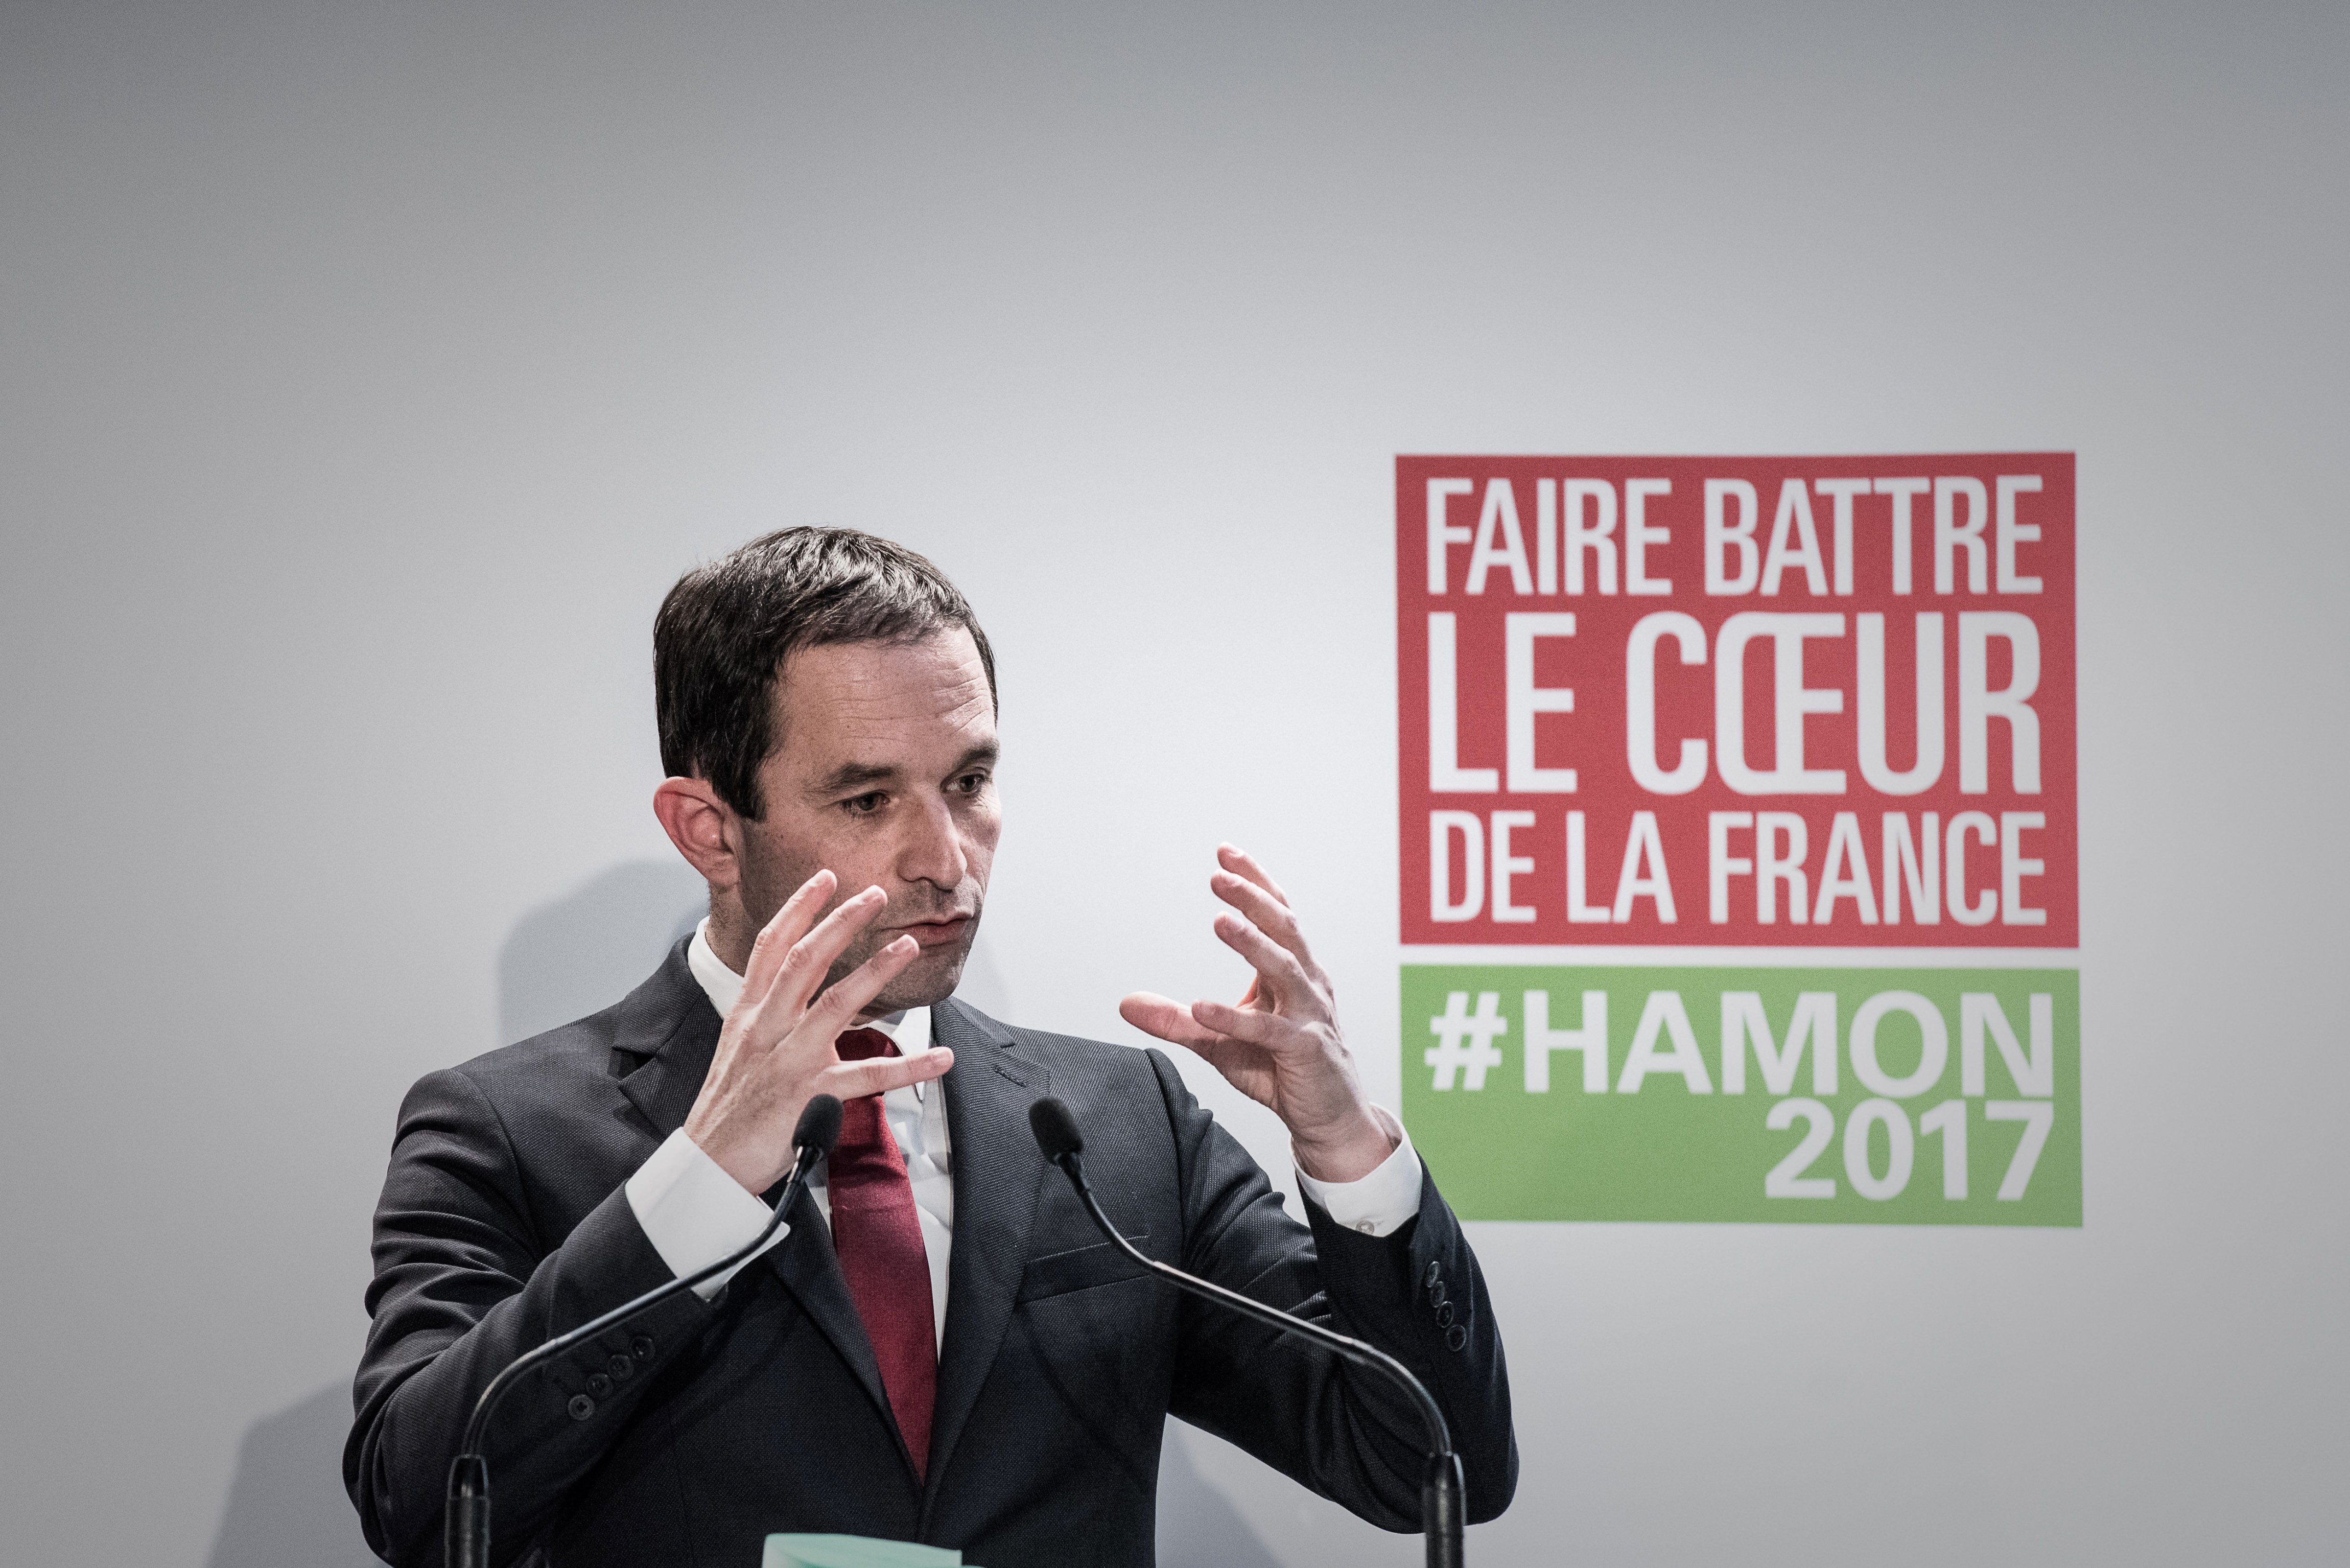 French Socialist Party presidential candidate, Benoit Hamon, speaks during a press conference following the inauguration of his campaign headquarters on February 11, 2017 in Paris.